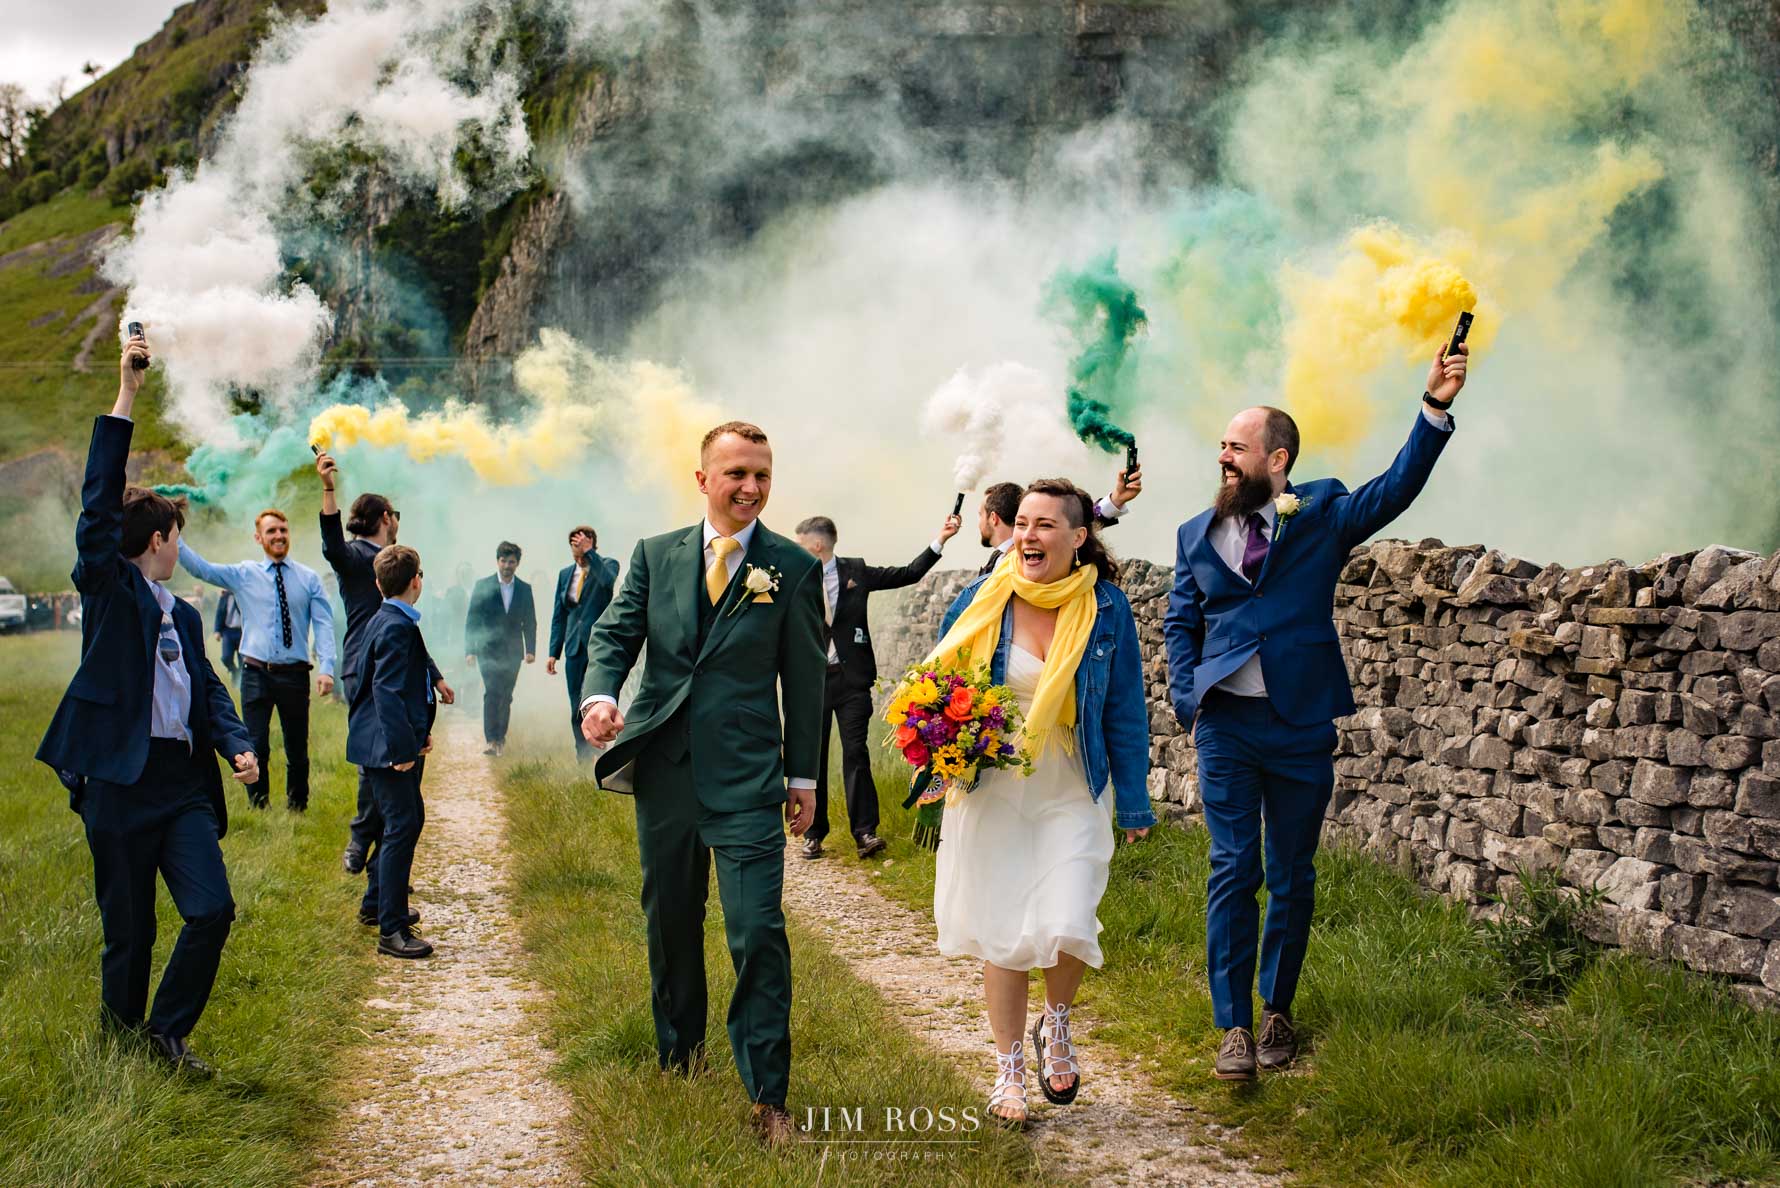 bridge and groom head wedding procession with smoke bombs in green and white